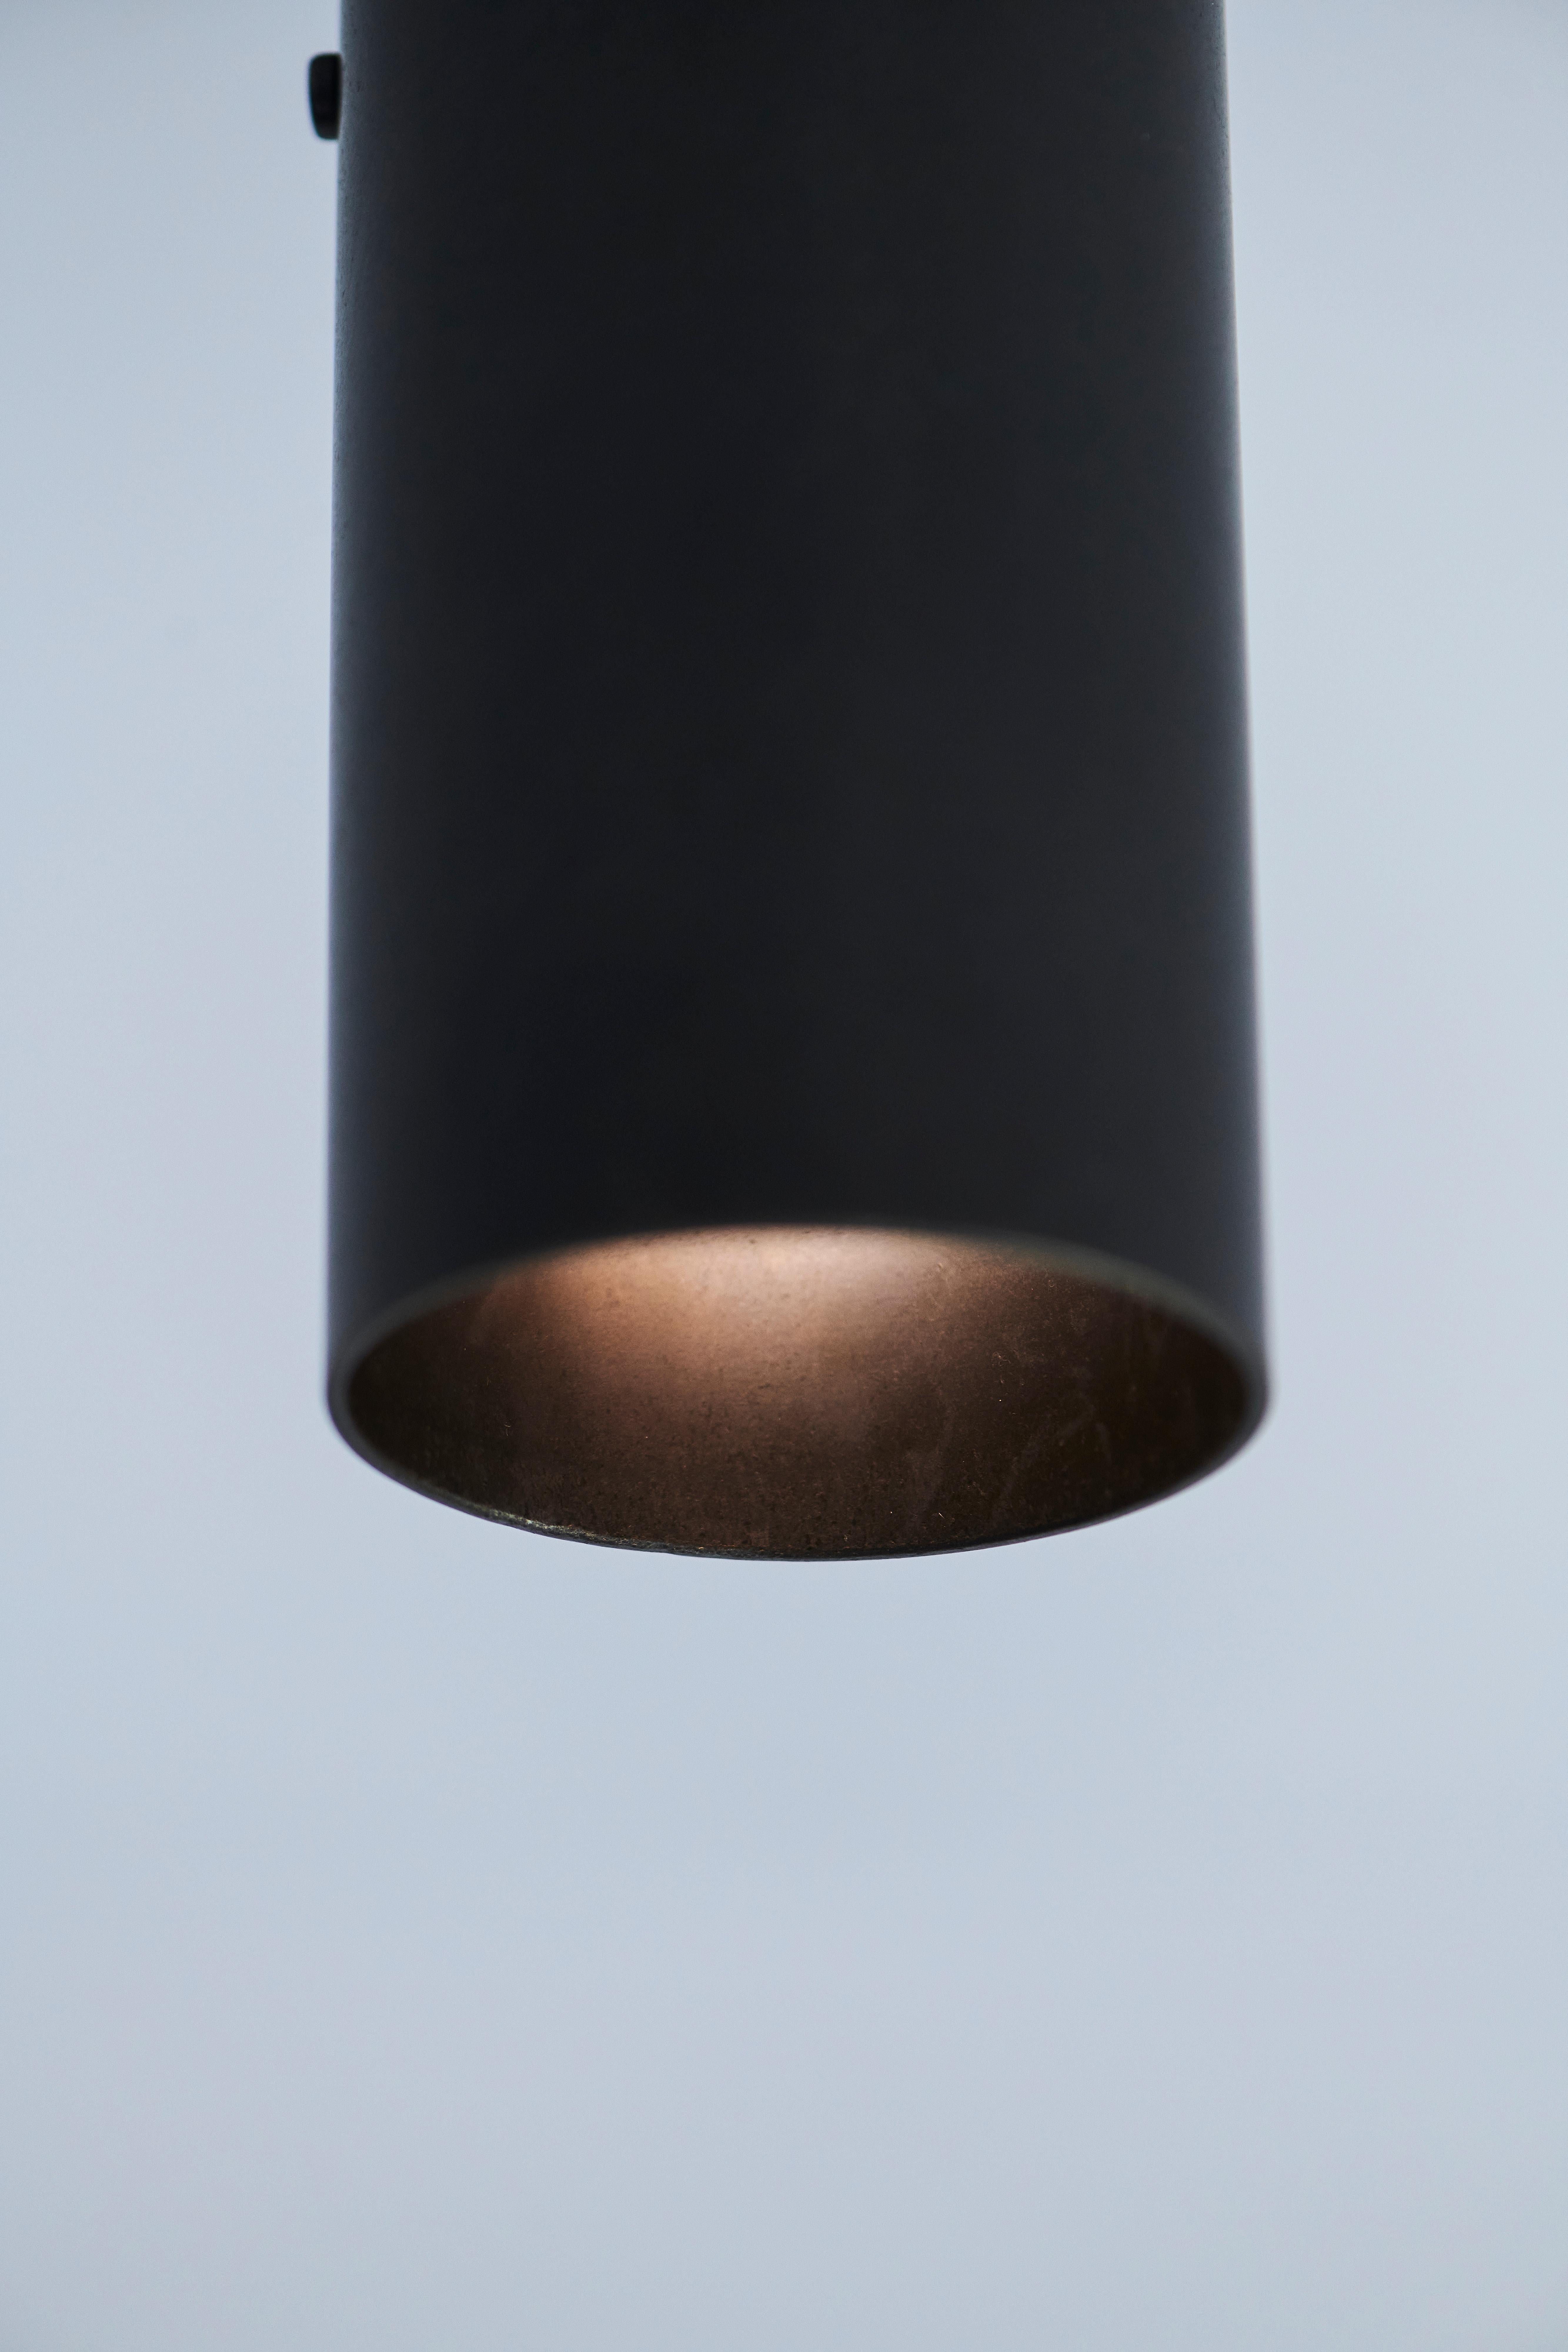 Handmade in solid brass in Australia by Dunlin. 

A heavyweight, solid brass pivoting spotlight. 
A cast brass ball pivot allows the light to rotate around its stem. 

14.5 cm long x 6.3 cm dia
(5.7